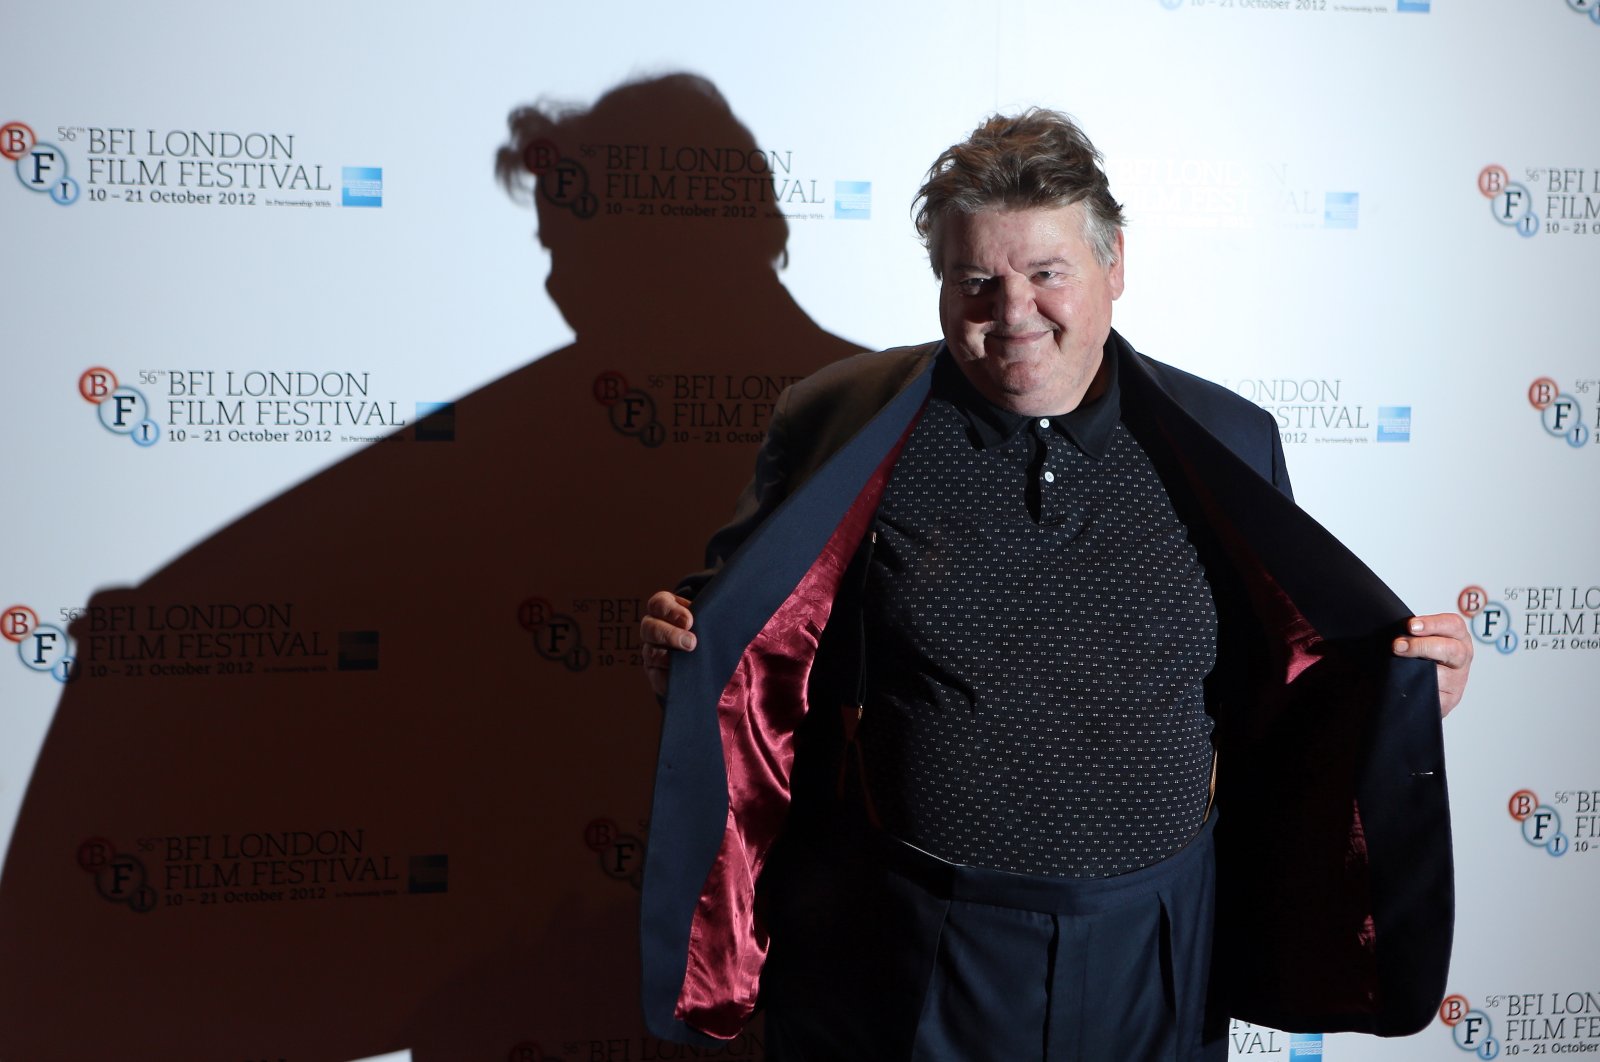 Scottish actor/cast member Robbie Coltrane poses during a photocall for "Great Expectations" during the 56th BFI London Film Festival, London, Britain, Oct. 21, 2012. (EPA File Photo)